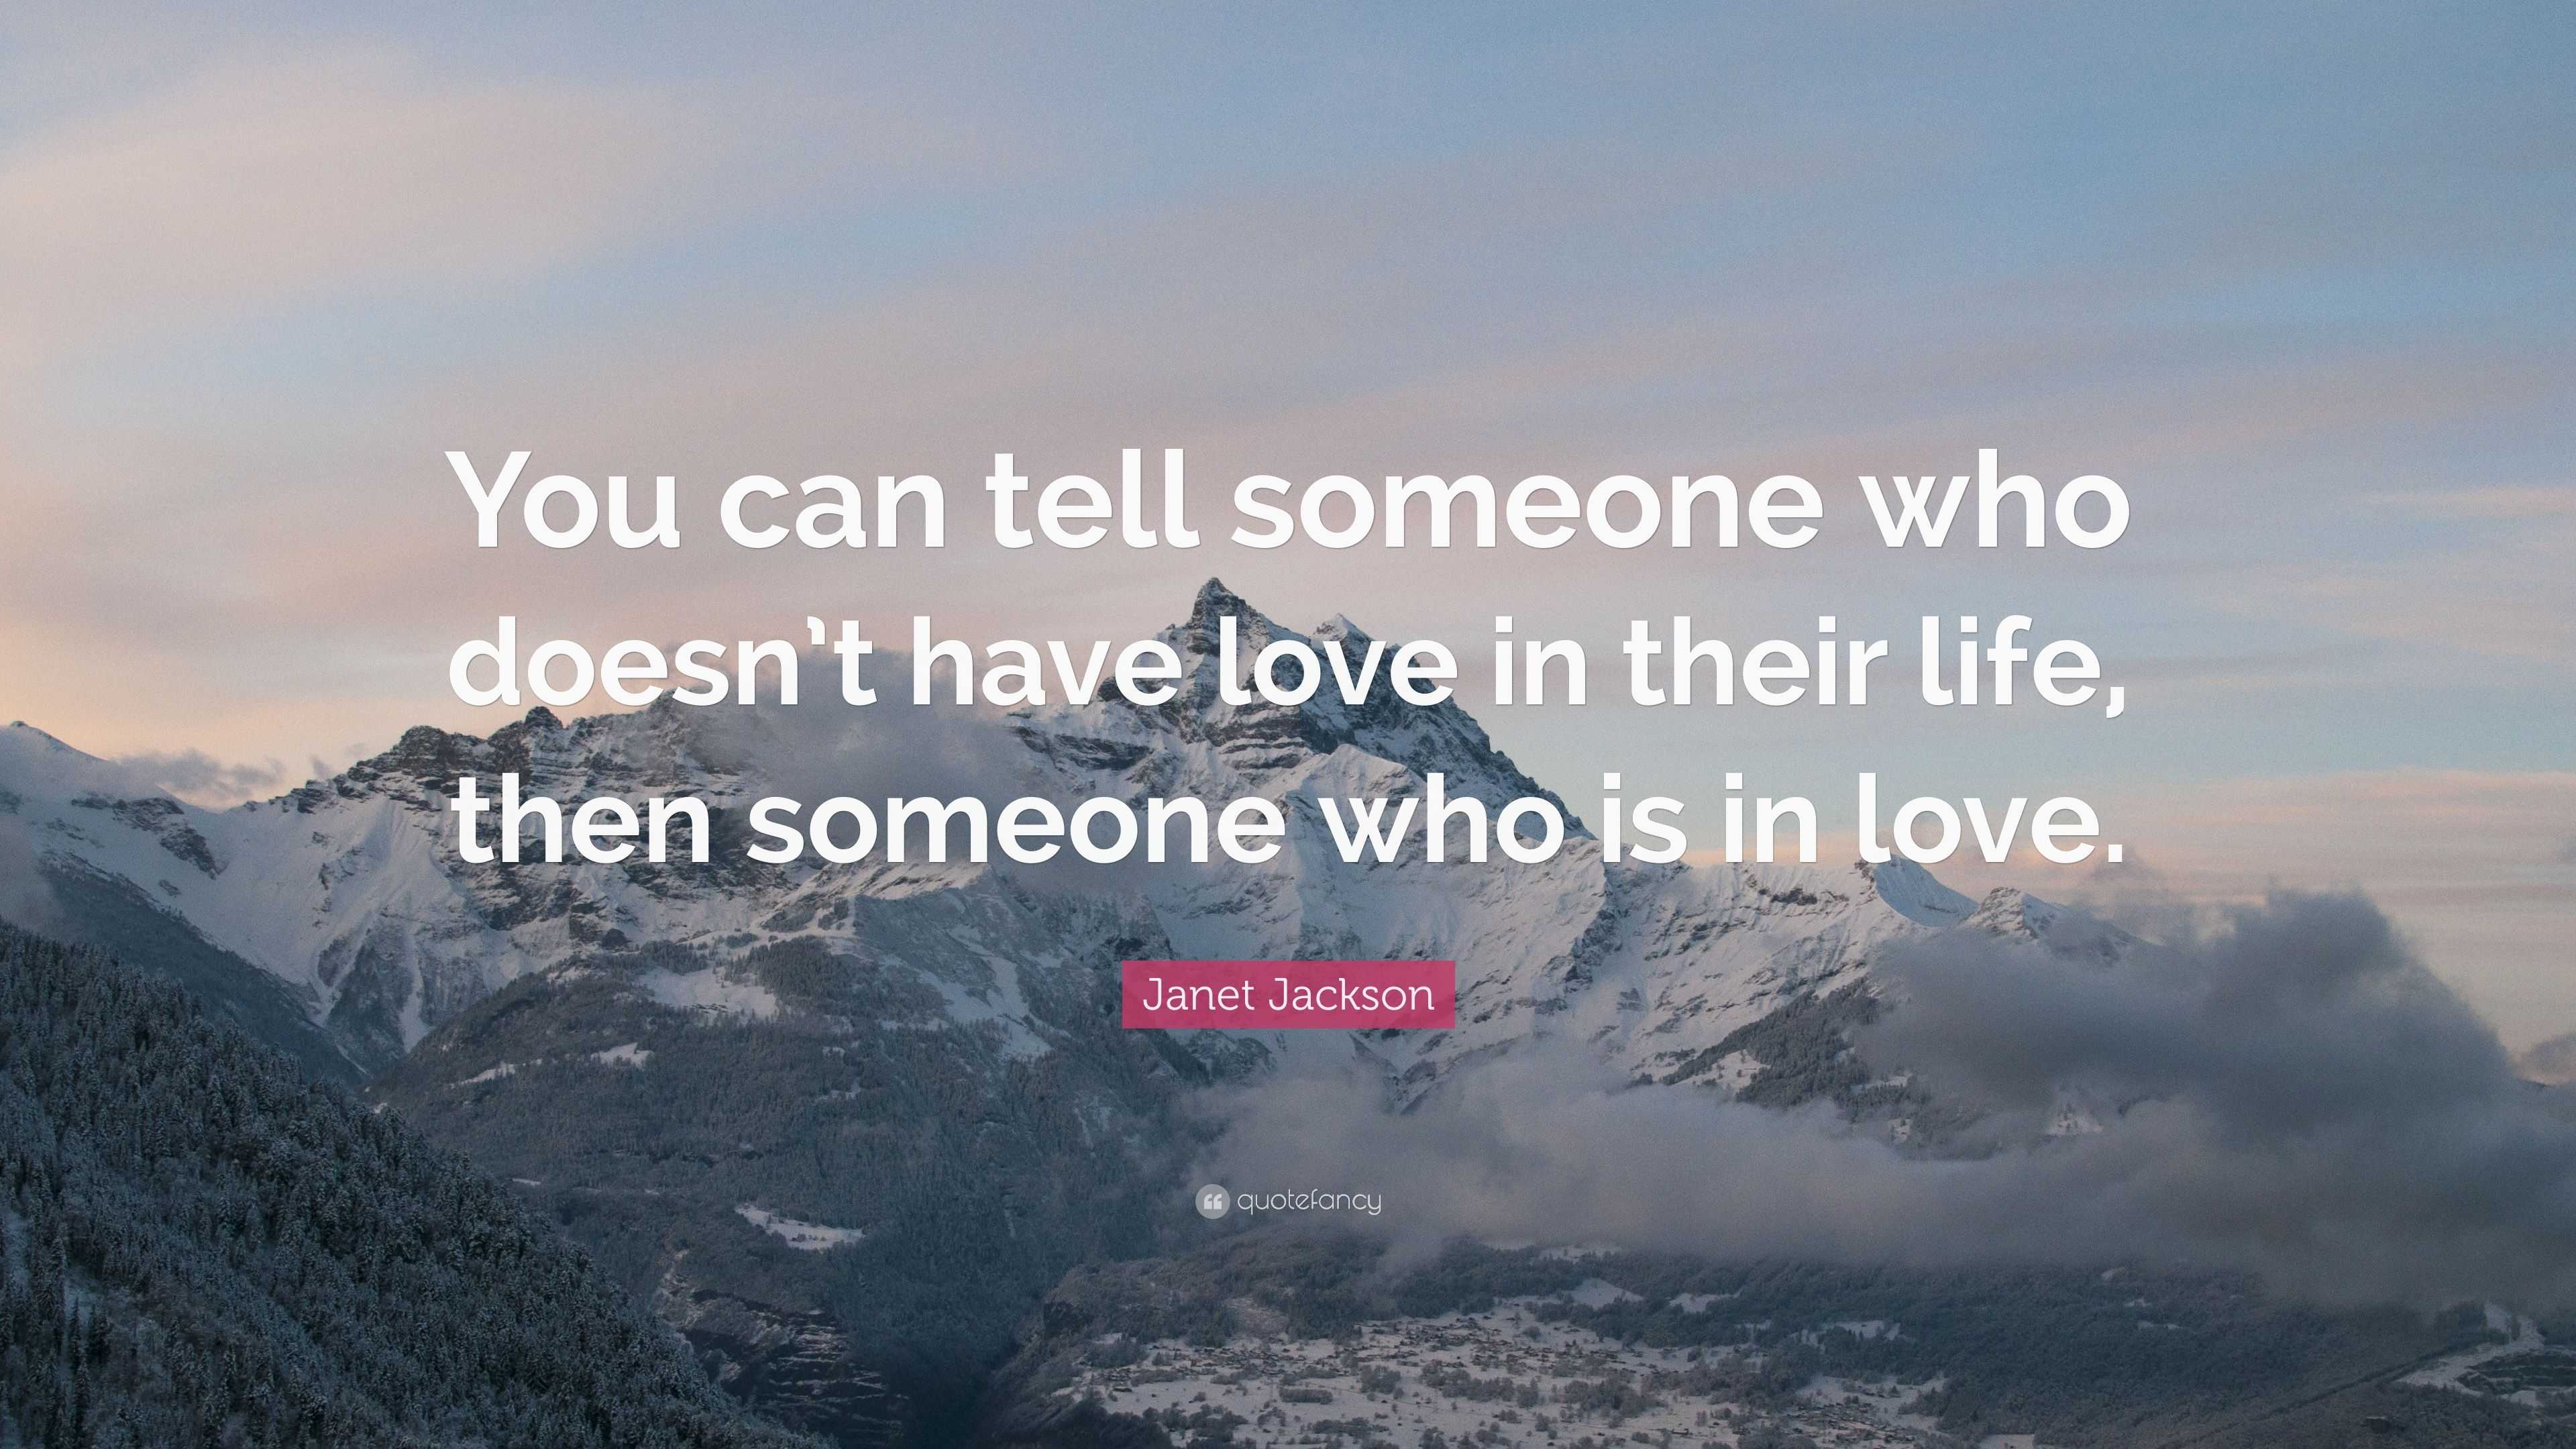 Janet Jackson Quote: “You can tell someone who doesn’t have love in ...